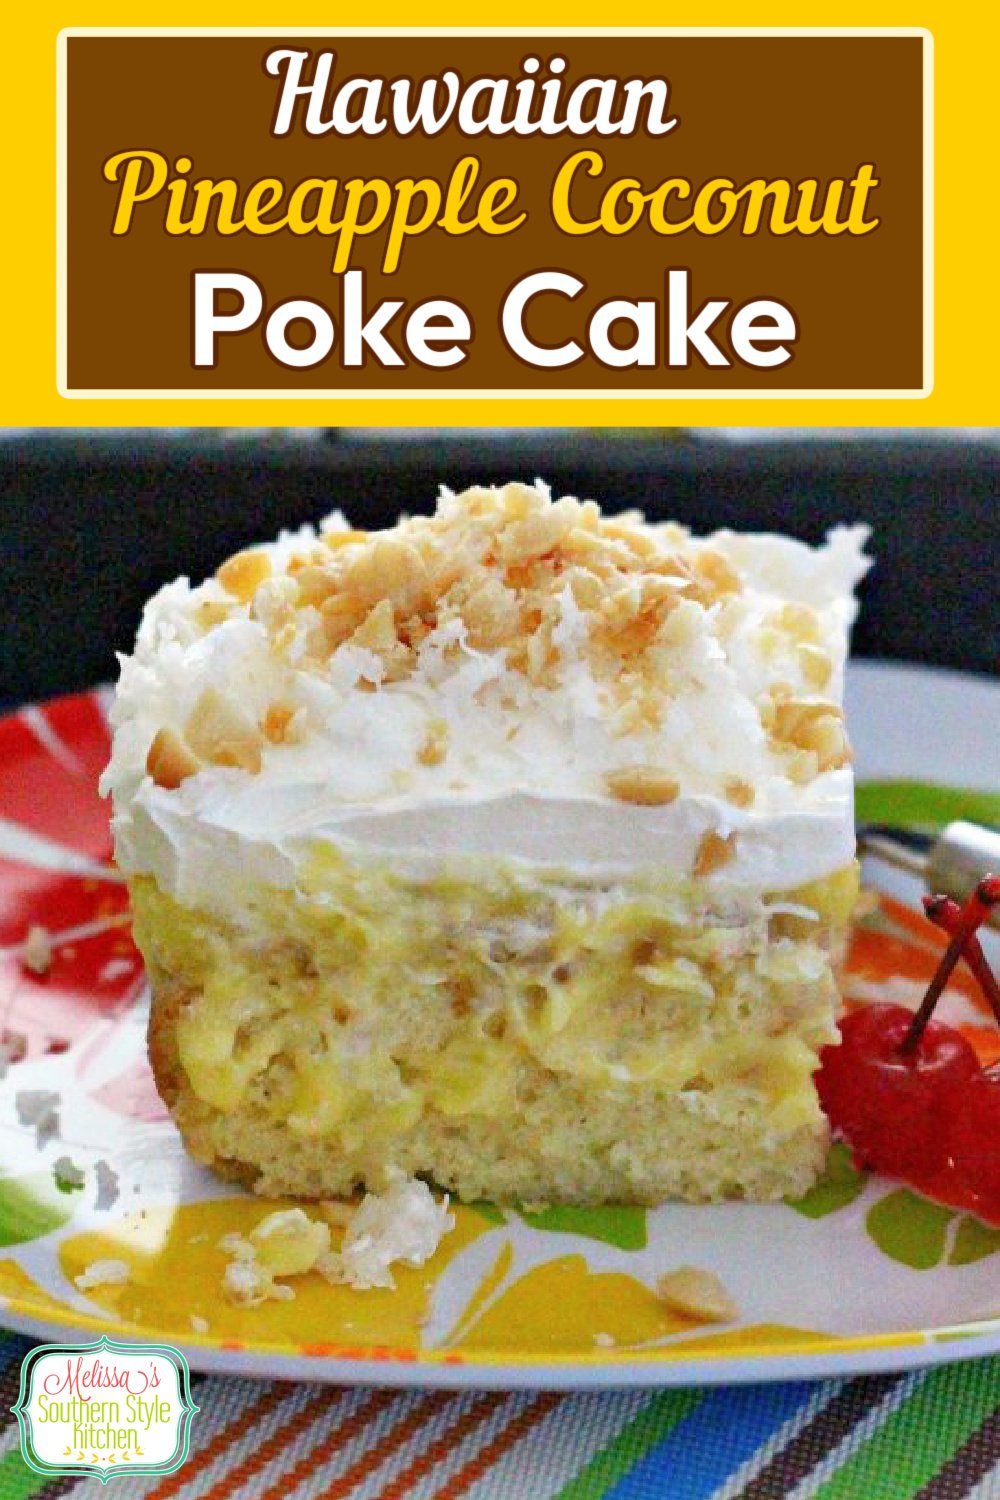 This island inspired Hawaiian Pineapple Coconut Poke Cake is a cake mix hack that's delicious to the very last bite #pokecakes #pineapplecake #pineapplecoconutpokecake #cakes #desserts #dessertfoodrecipes #southernfood #southernrecipes #sheetcakes